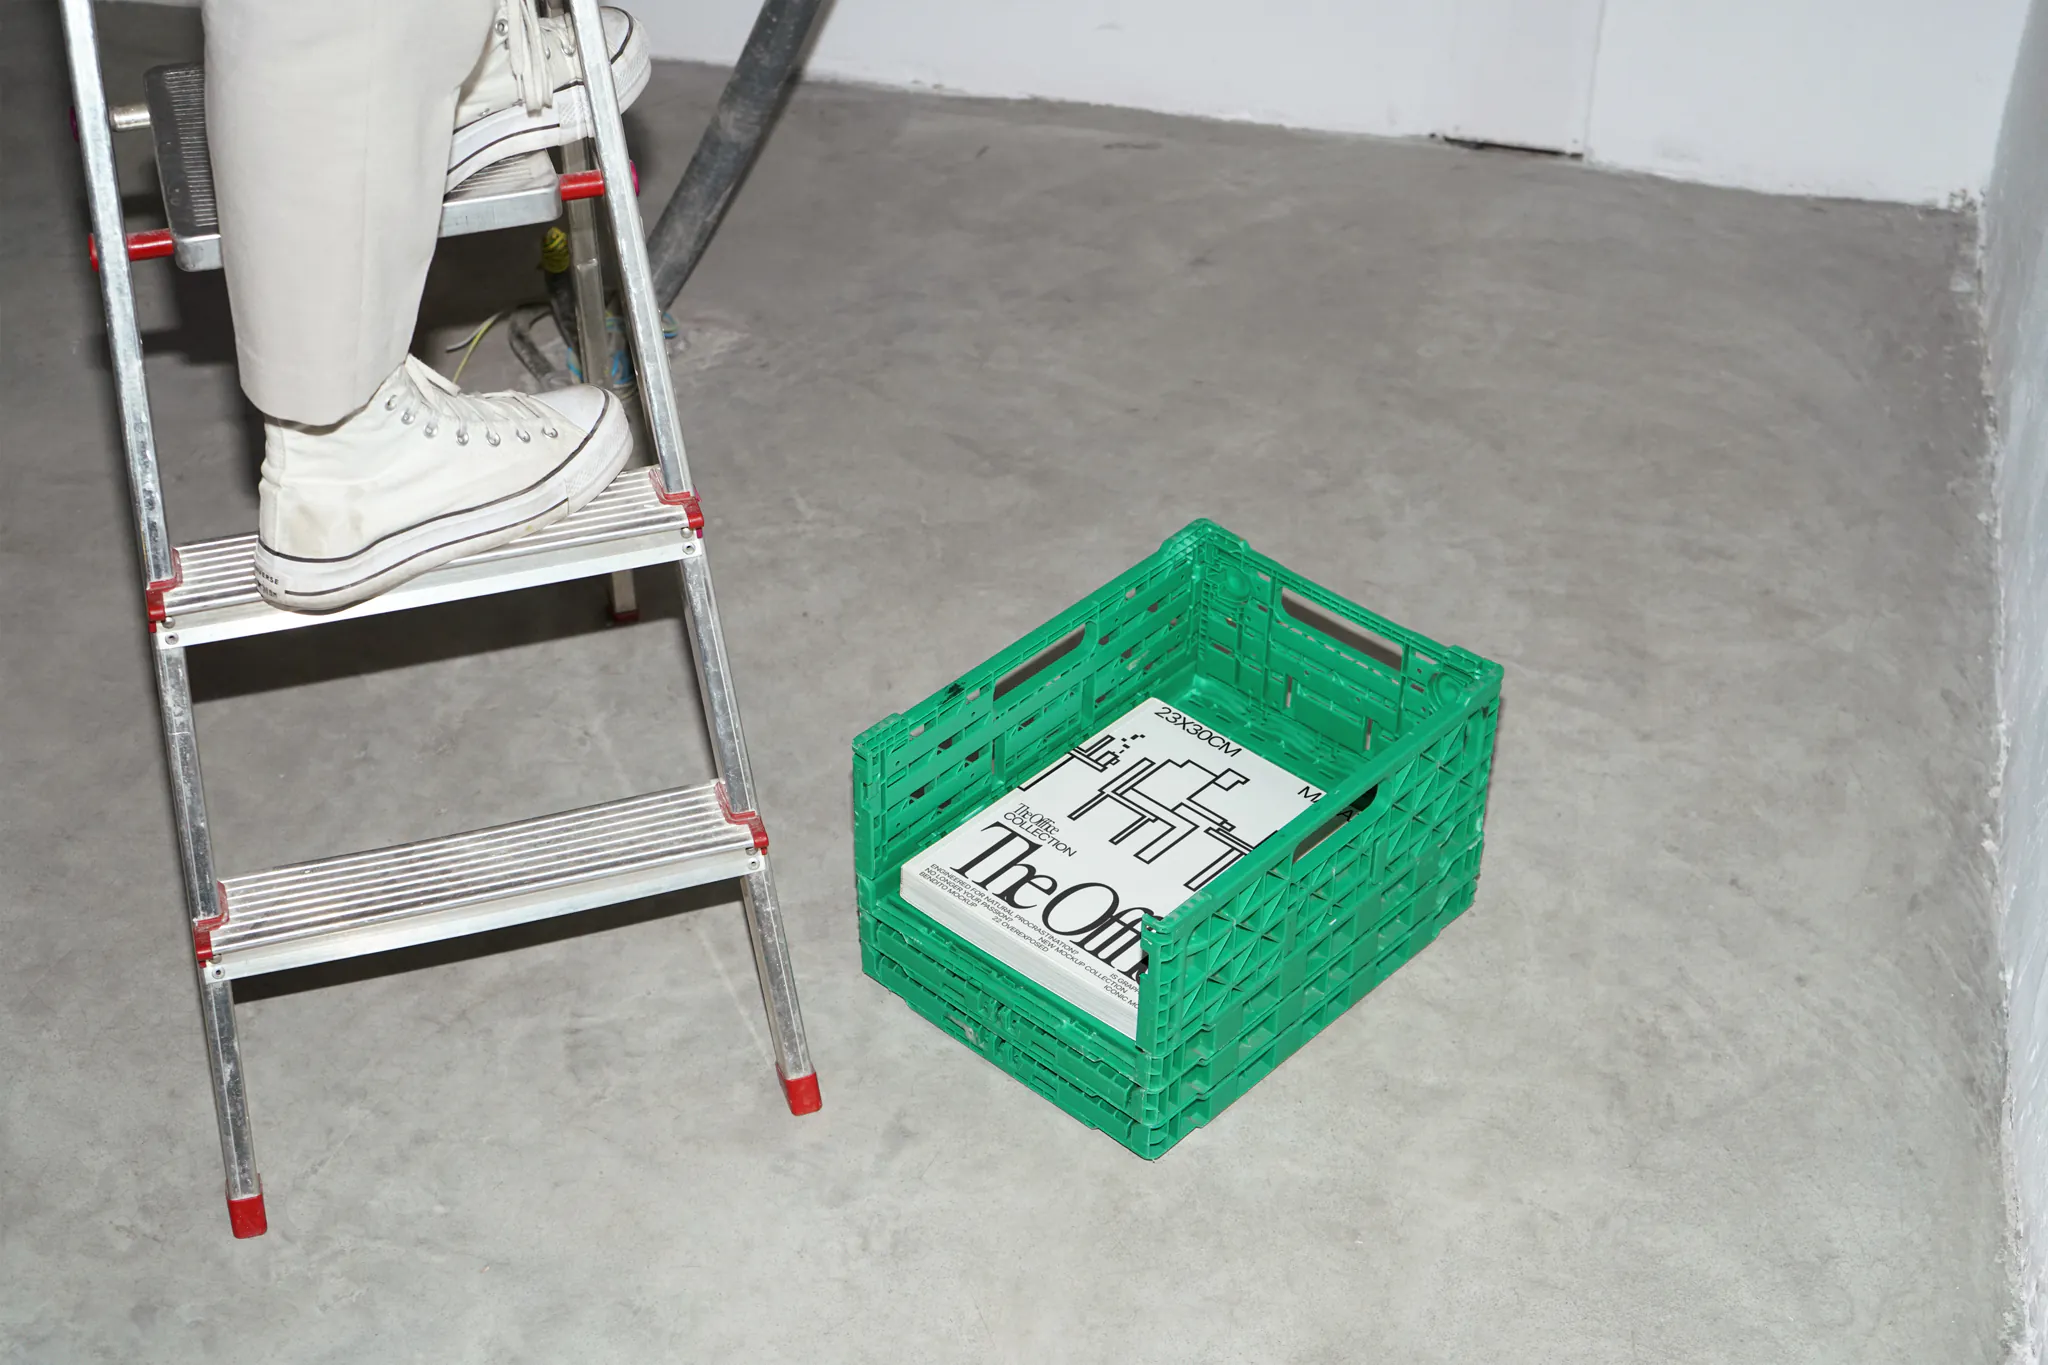 Magazine mockup inside a green plastic box over a concrete floor near a person who is on a ladder